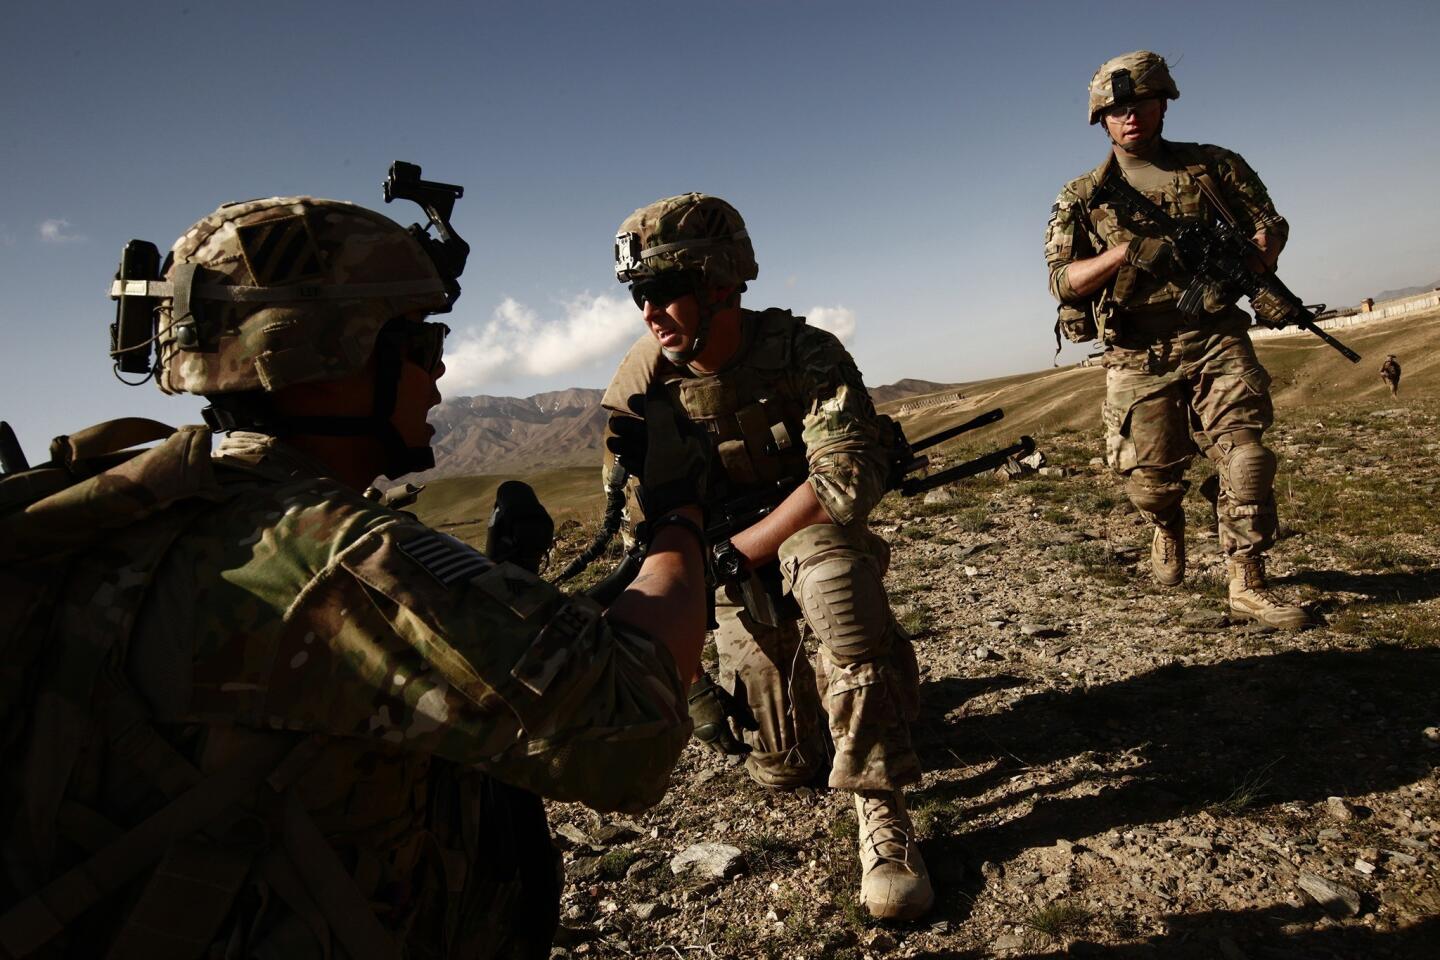 Sgt. Christopher Lee, 23, of Beverly Hills, left, Pvt. Tyler Hartzheim, 20, of the Palos Verdes Peninsula and other soldiers of Bravo 3-15 are helping the Afghan military prepare to take over security responsibilities.